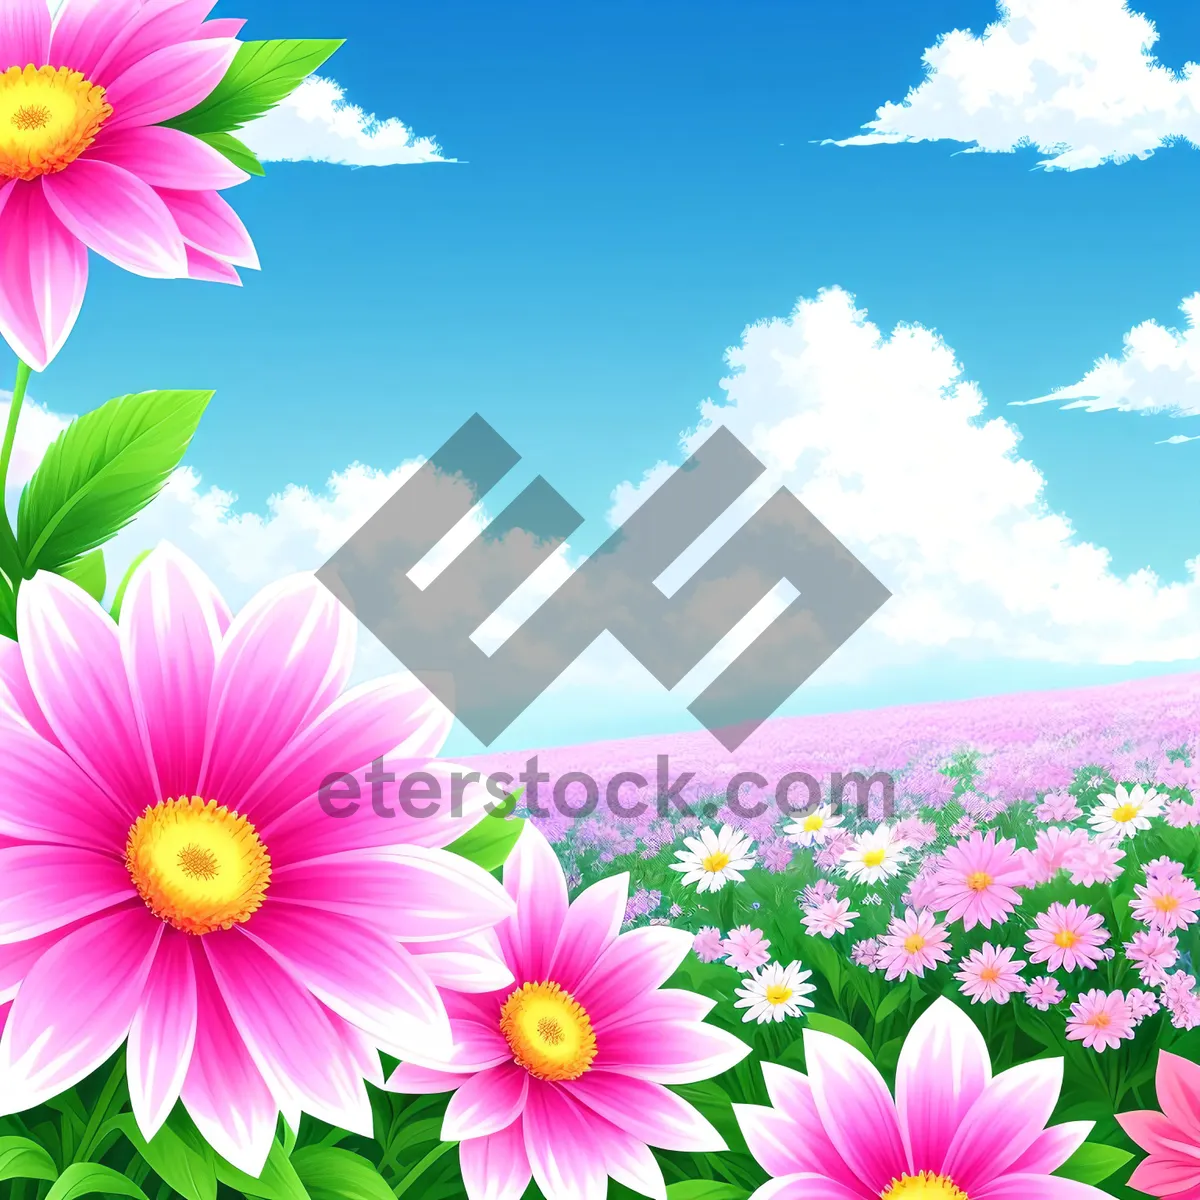 Picture of Vibrant Blooms: Pink Daisy Floral Garden Design